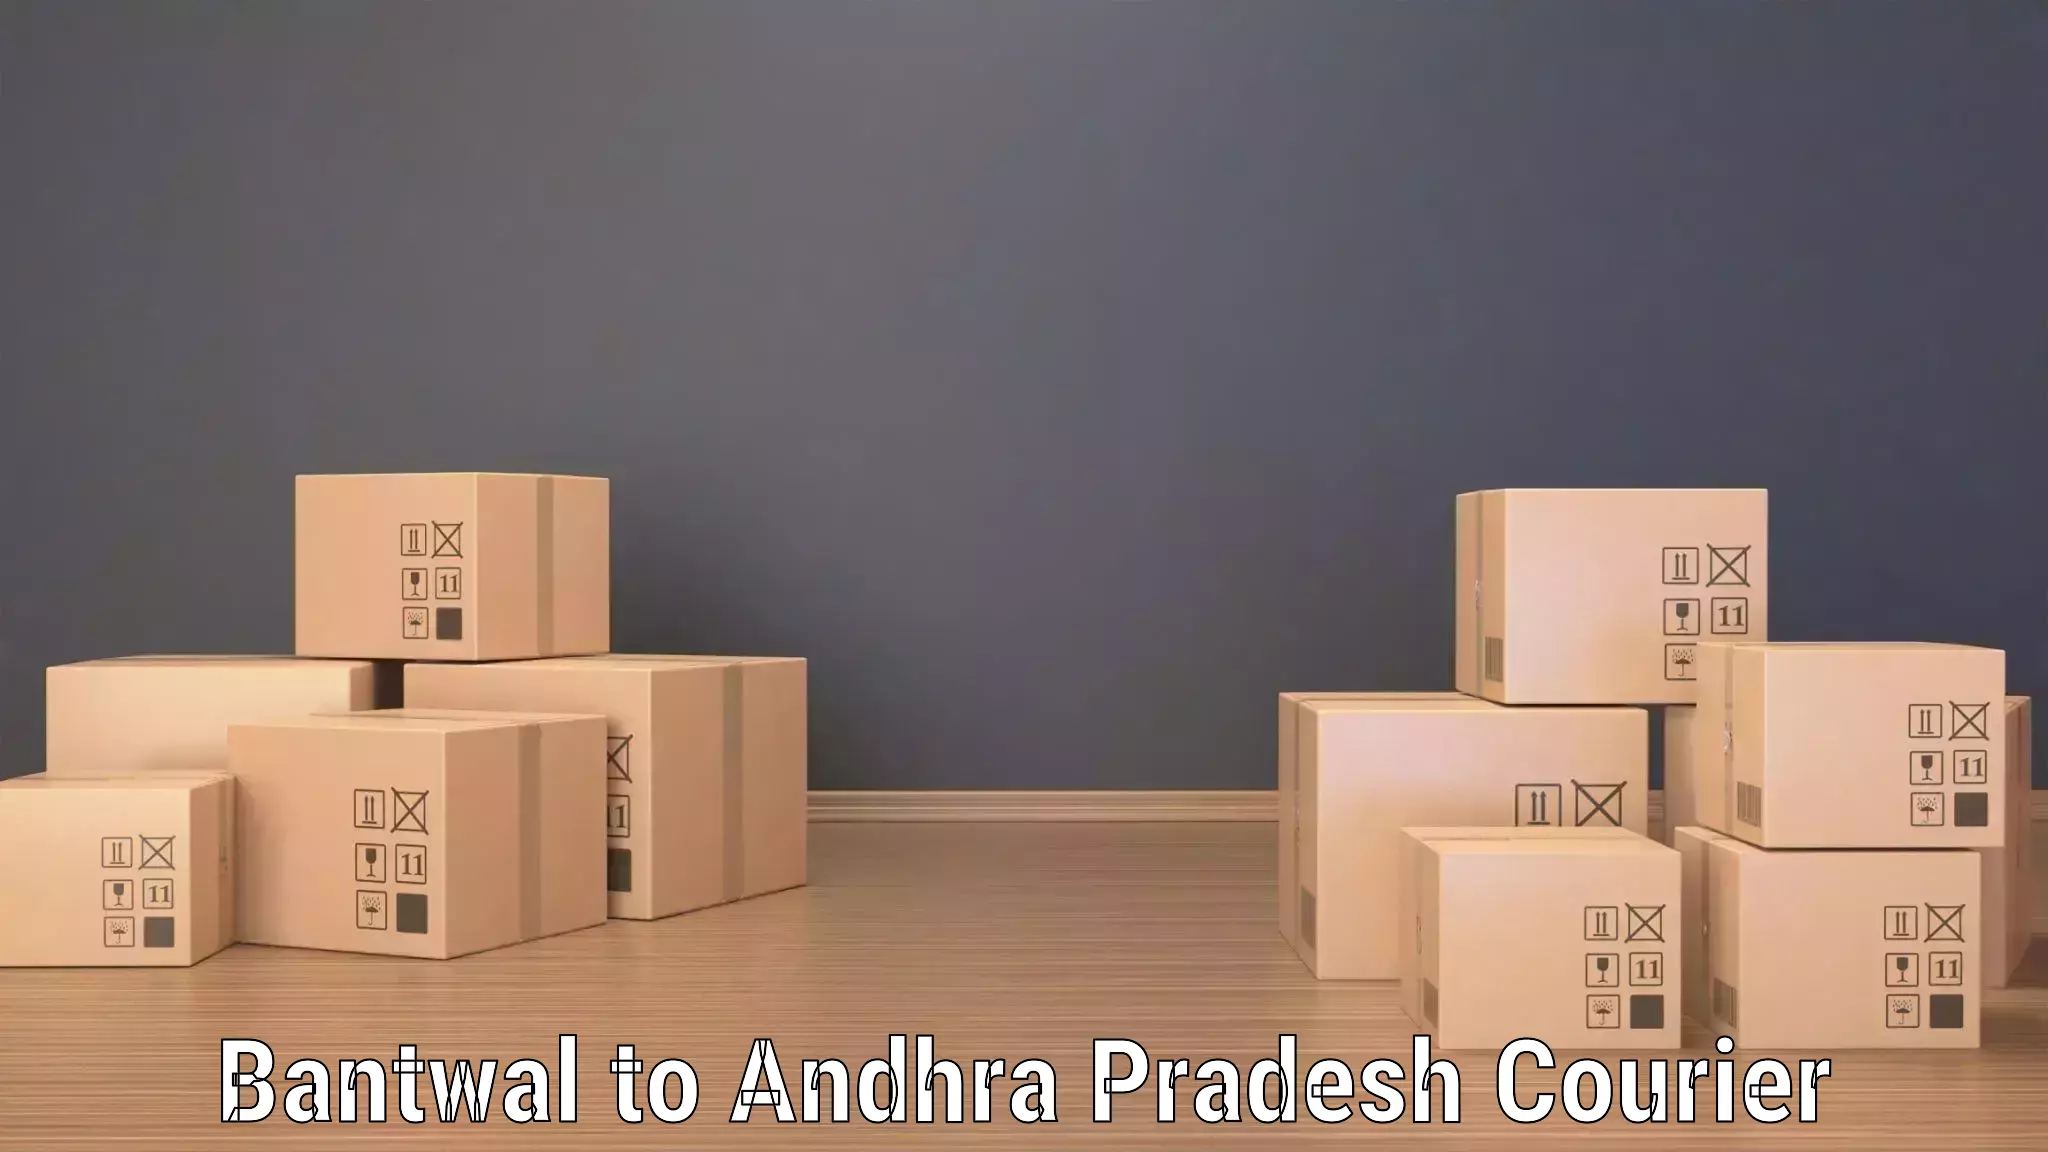 Rural area delivery in Bantwal to Anantapur